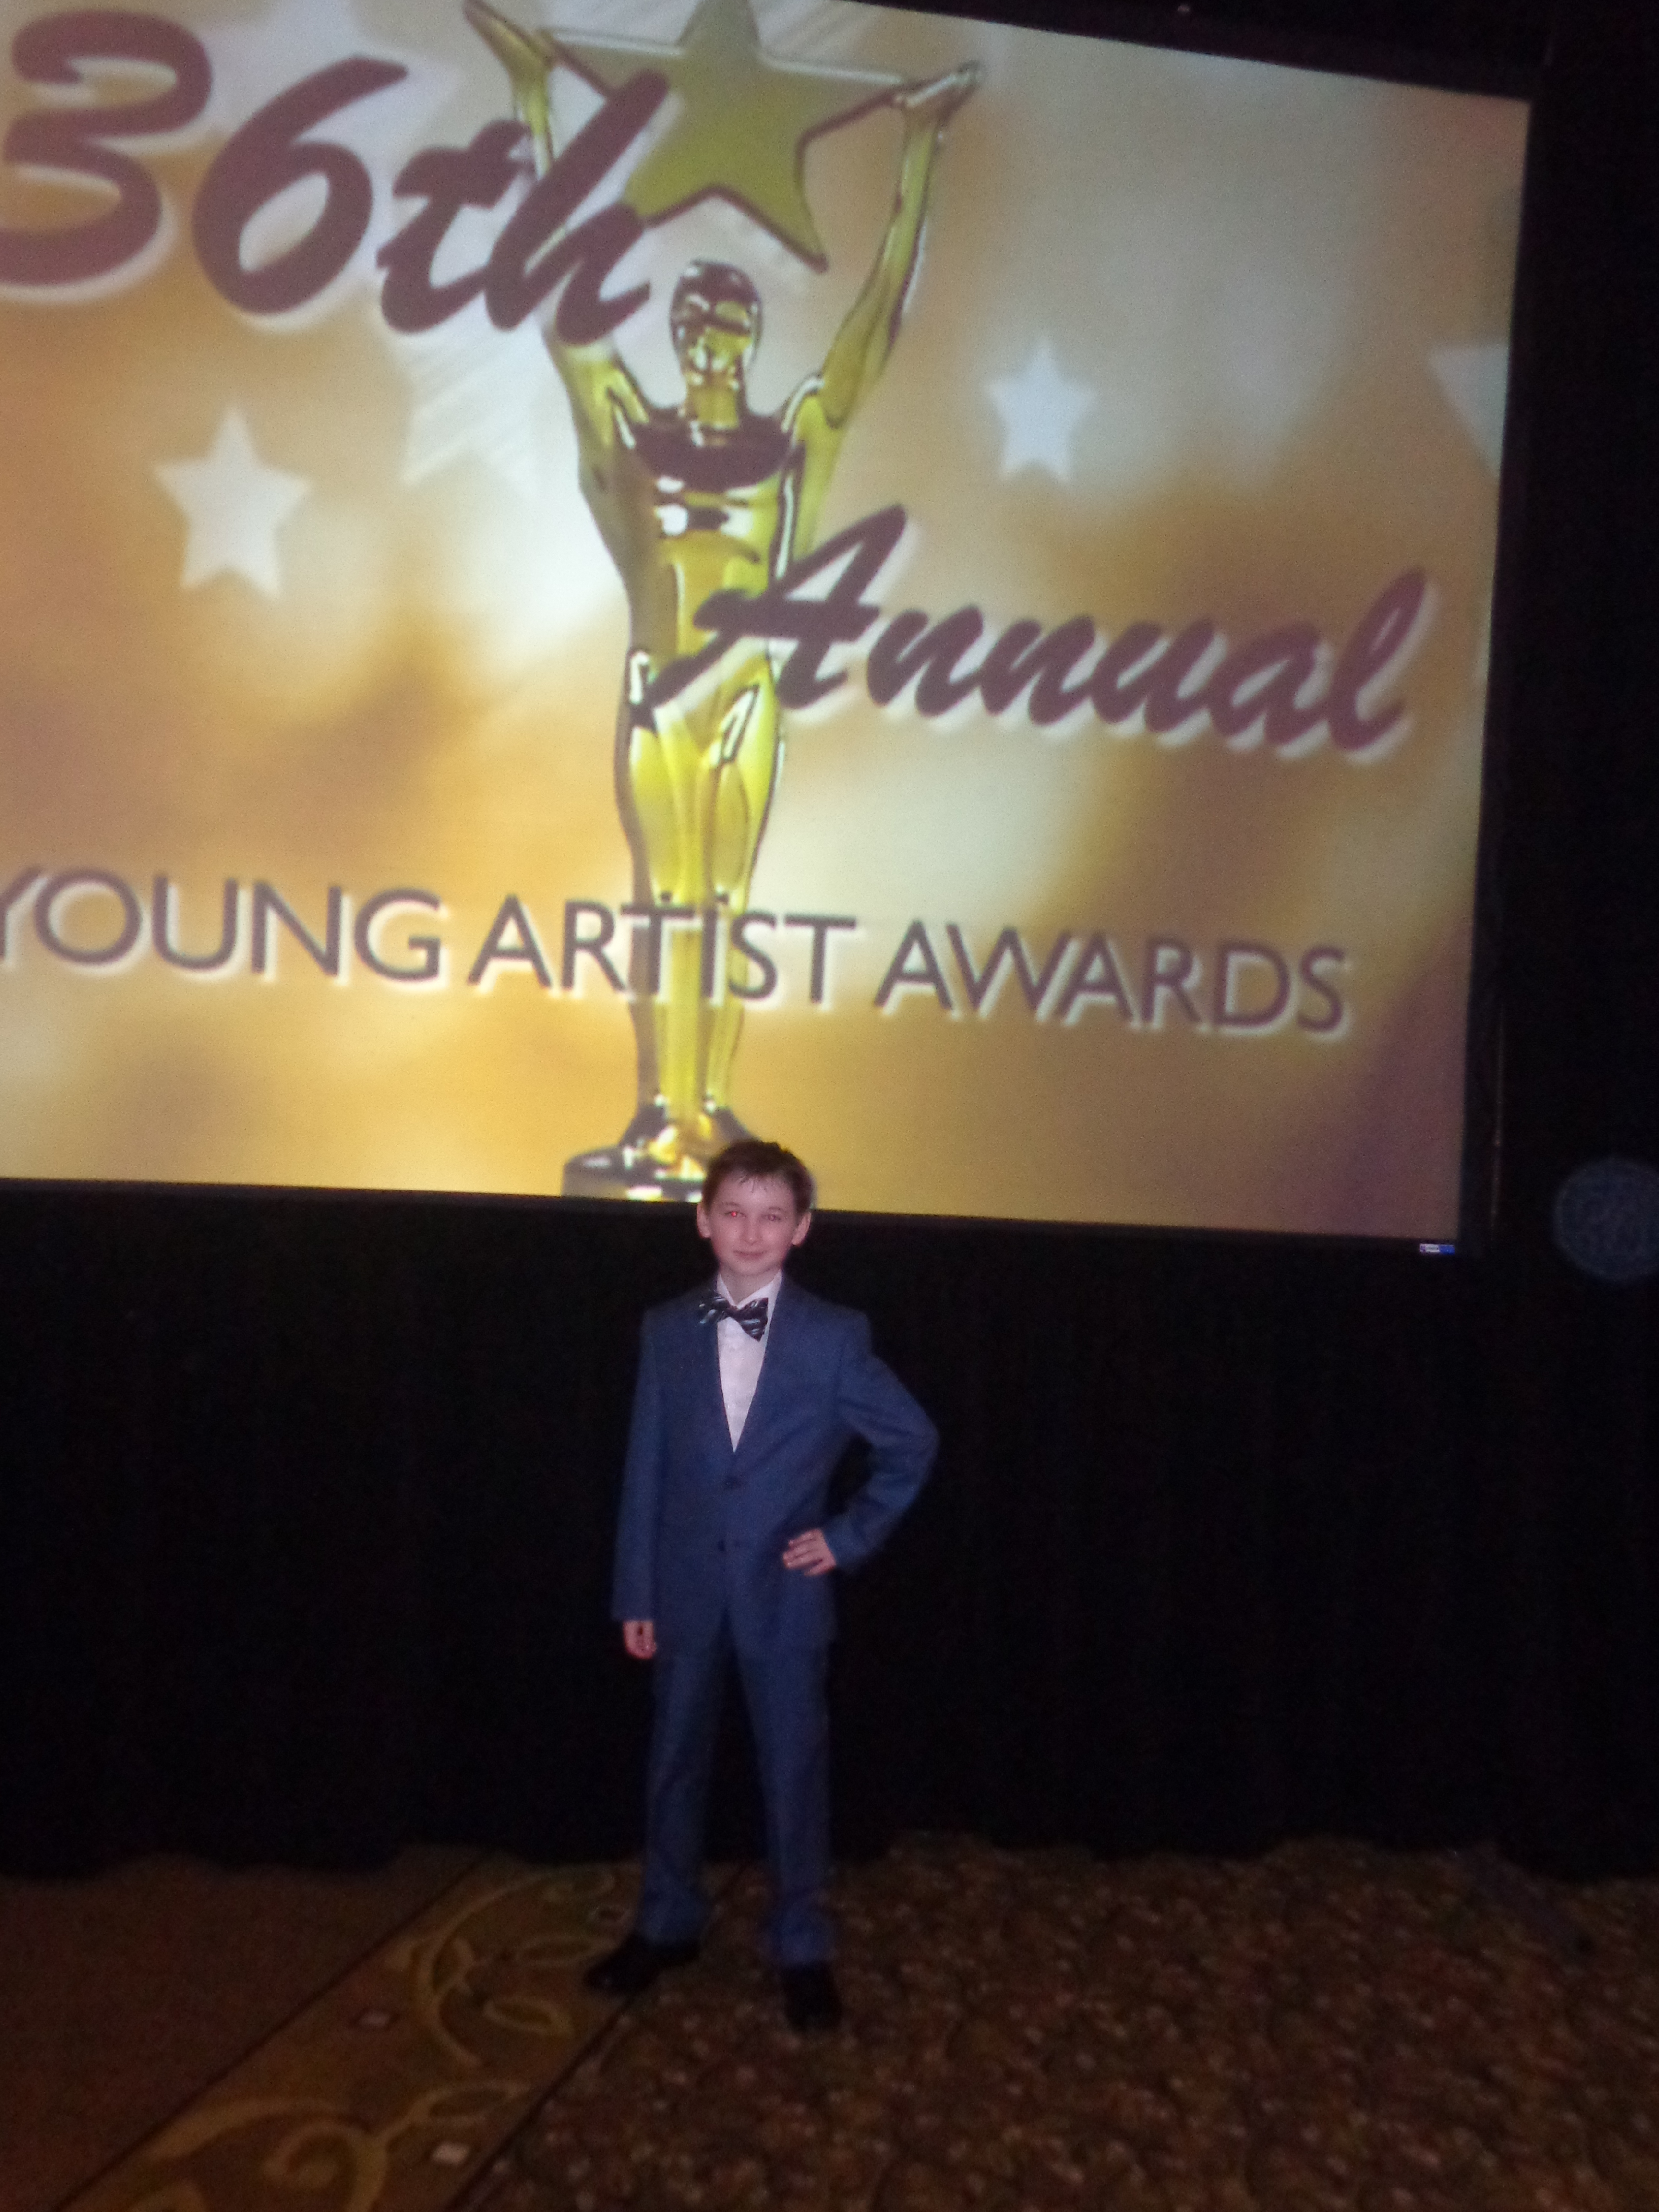 2015 Young Artist Awards